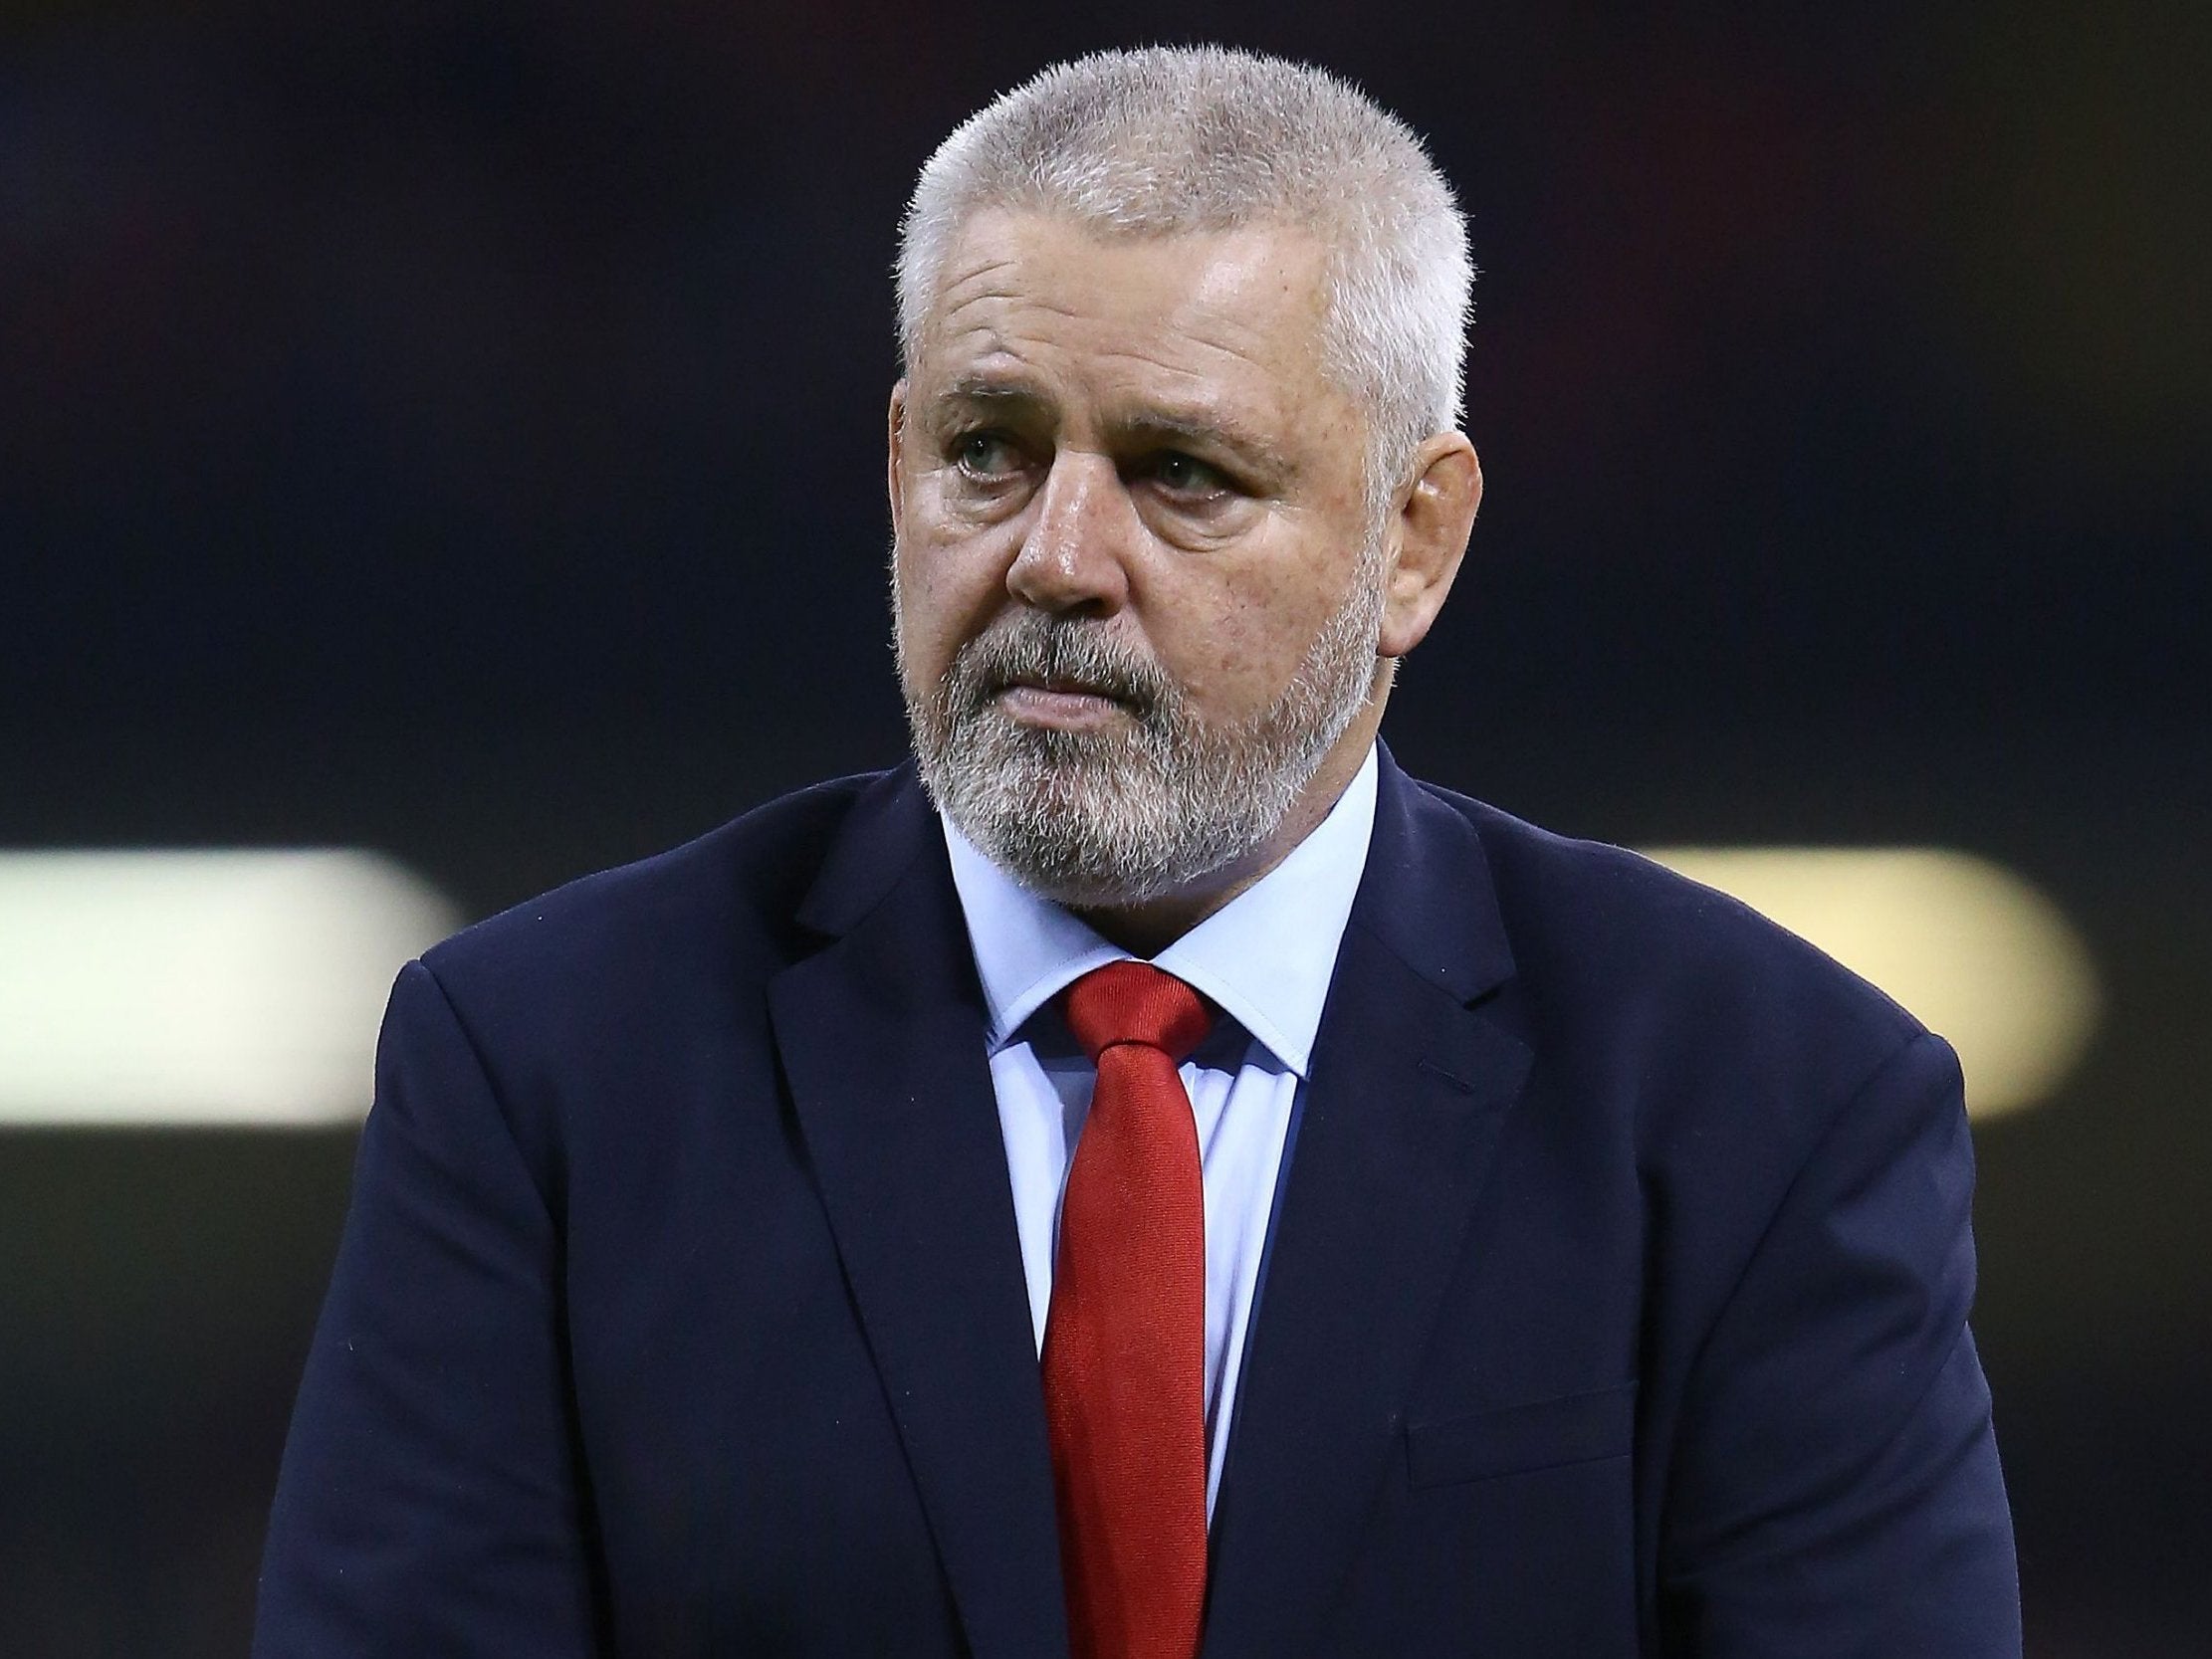 Warren Gatland will be delighted with how Wales' autumn campaign has unfolded